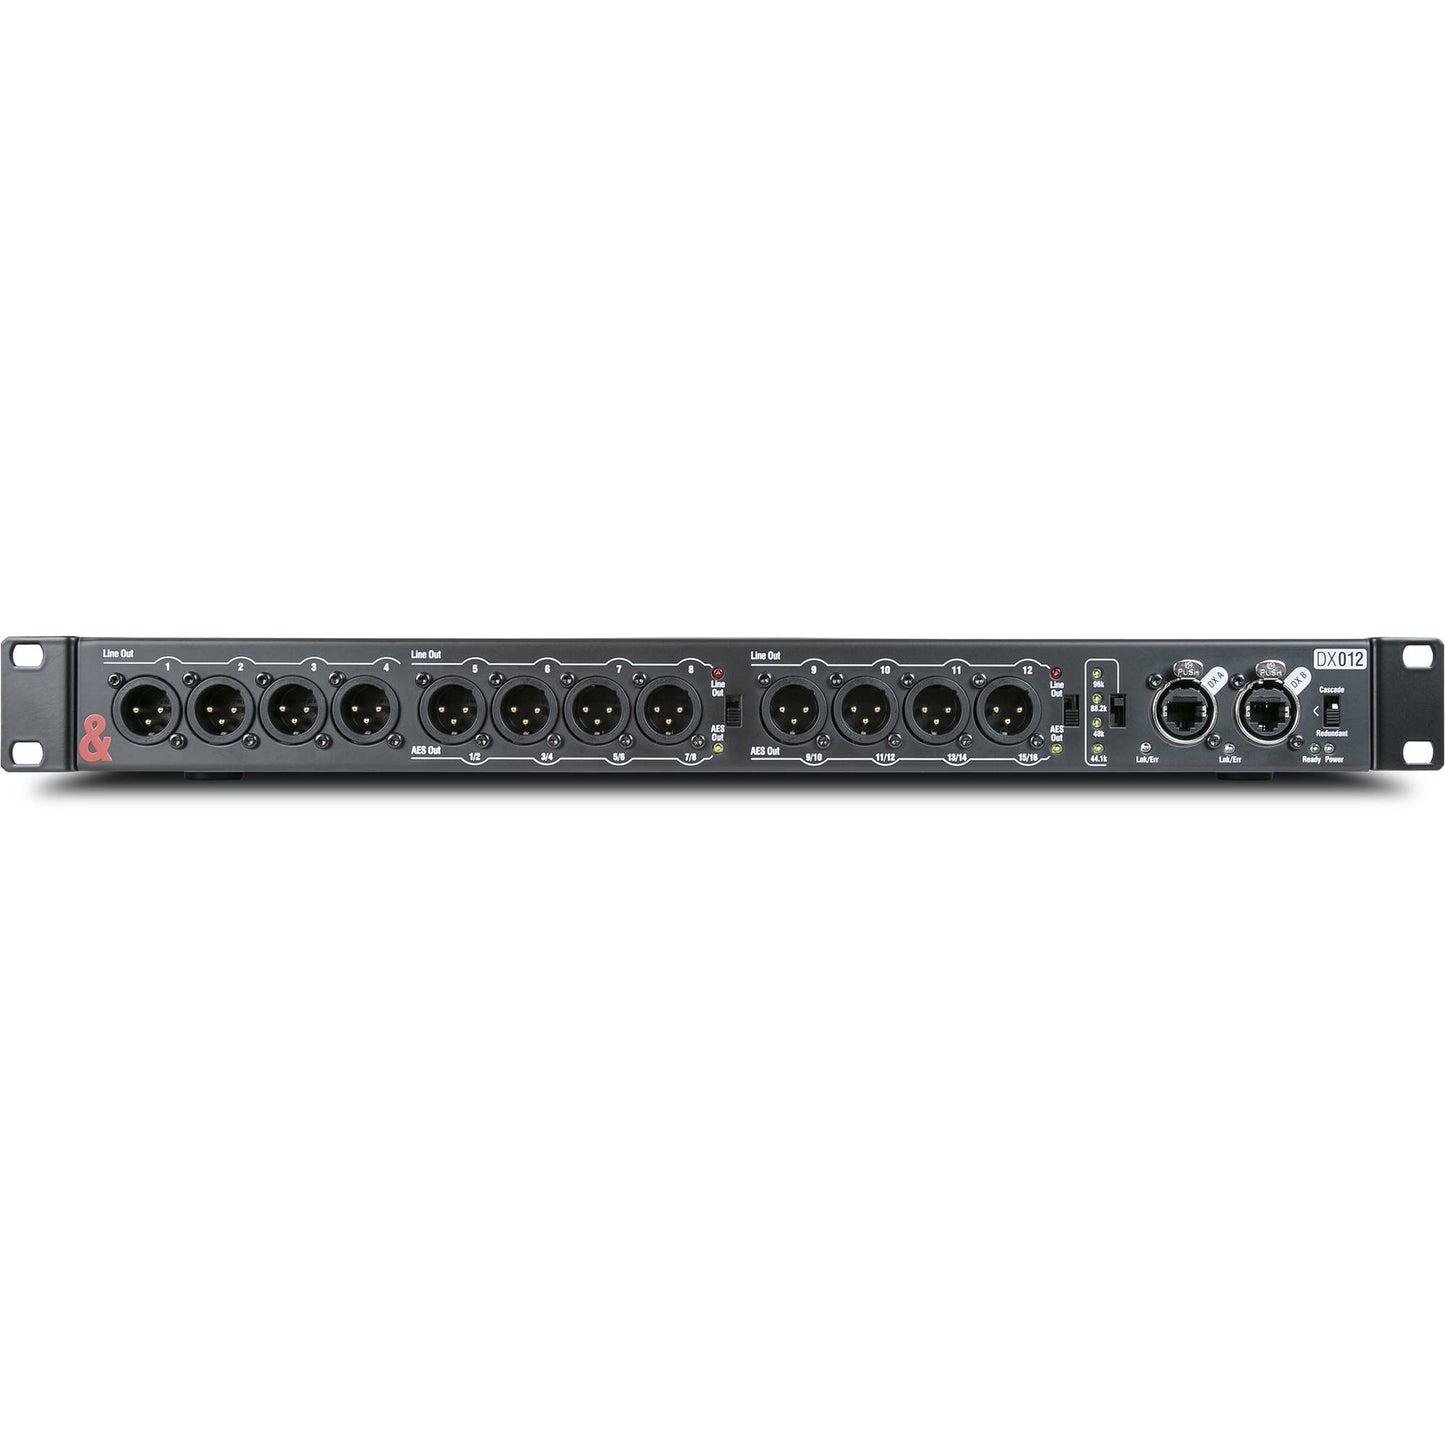 Allen & Heath DX012 12 XLR Output Audio Expander with Analog and AES Connections for SQ, Avantis, dLive Mixers